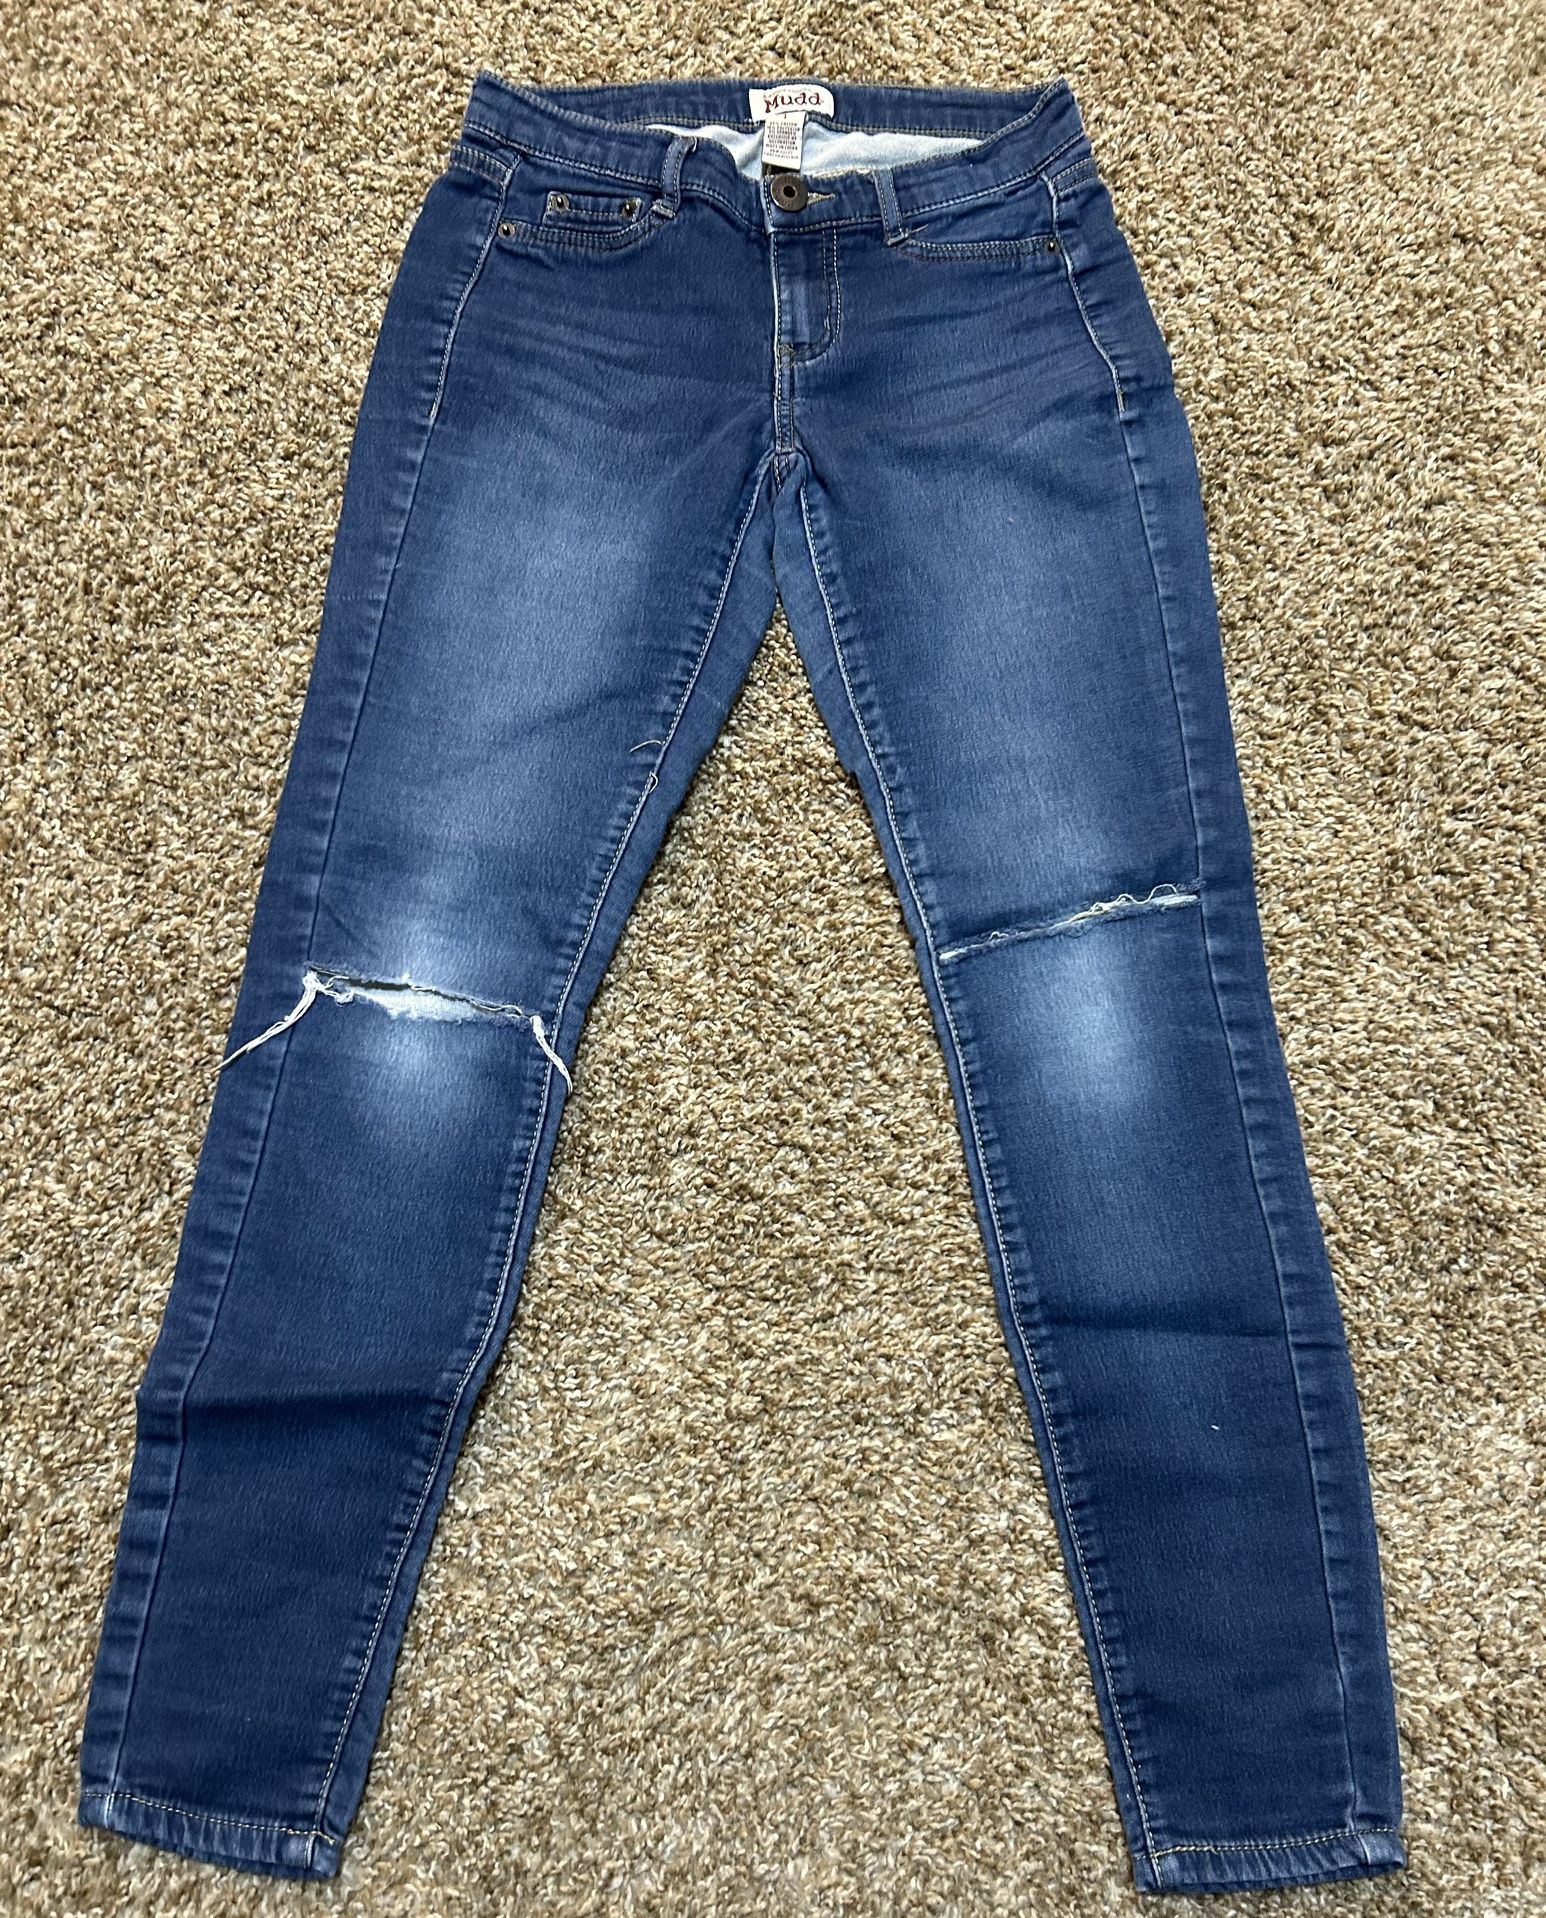 Mudd distressed, jeans, size 1